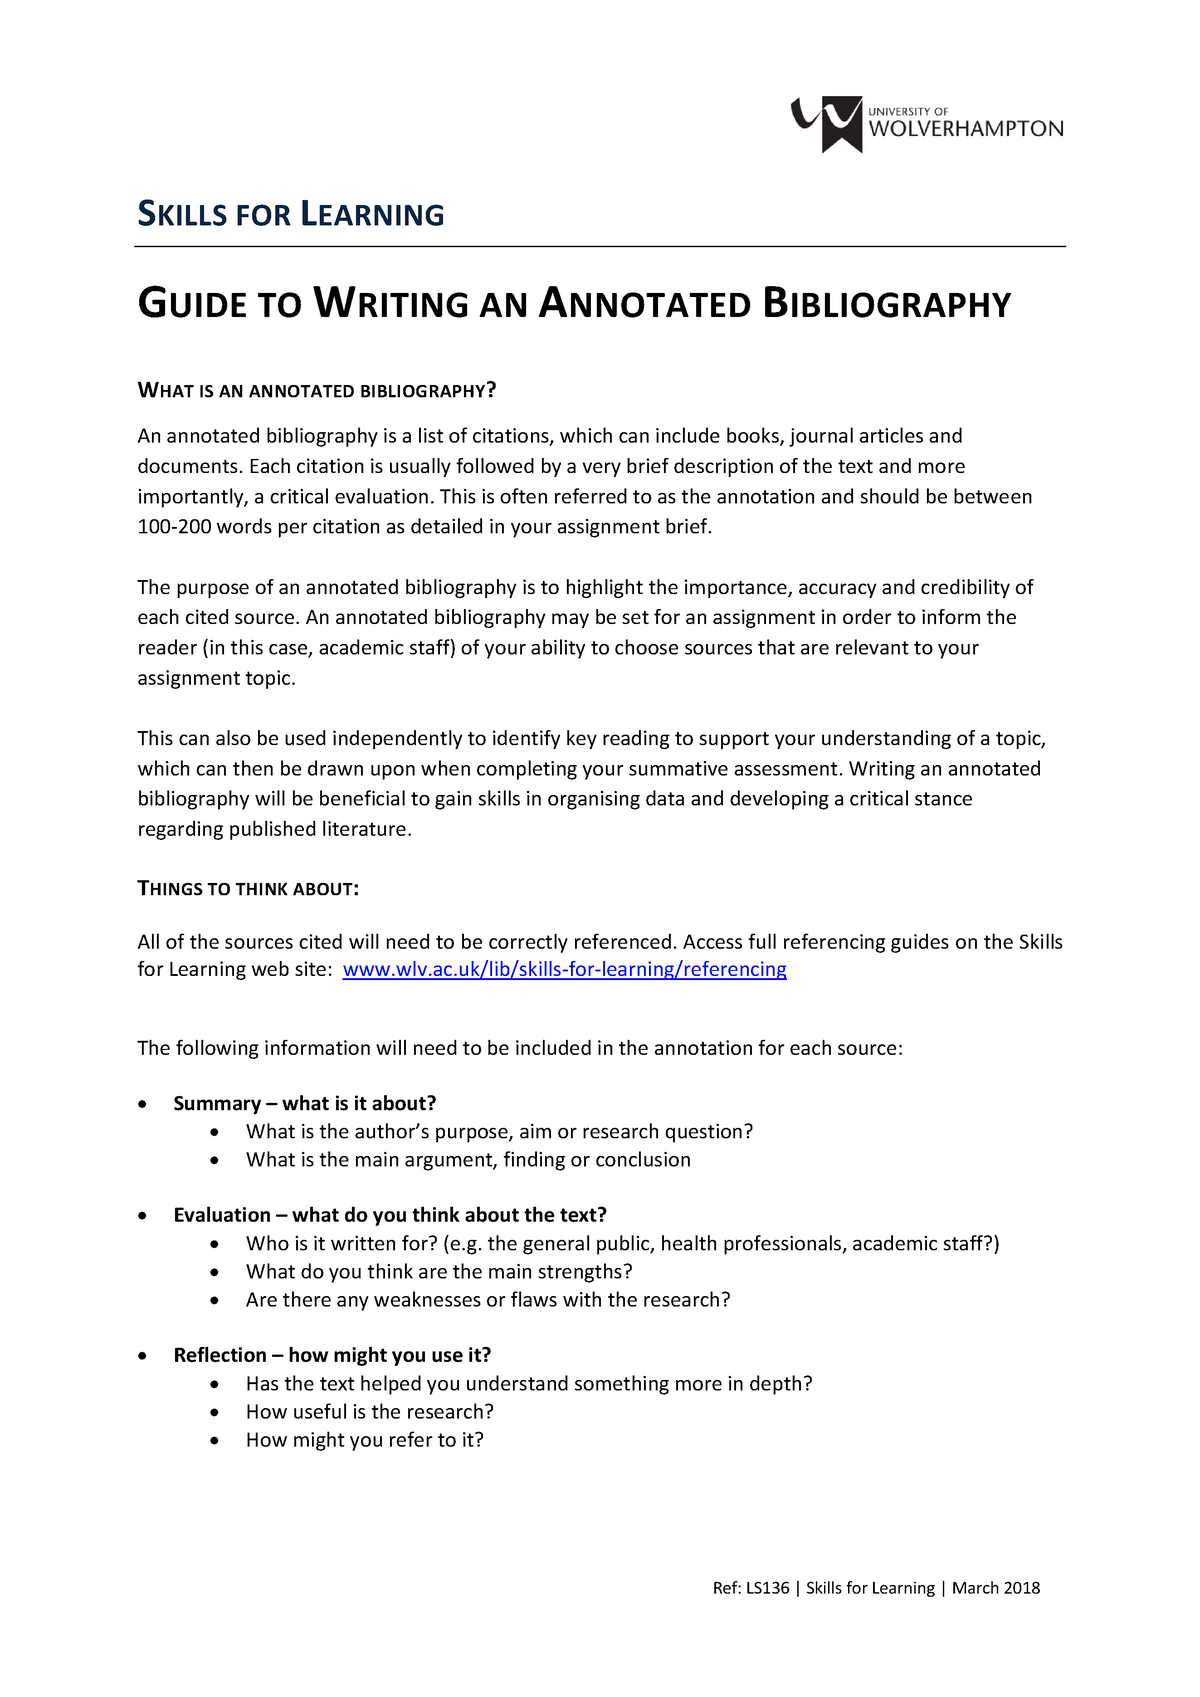 LS27 Guide to Writing an Annotated Bibliography - Ref: LS27